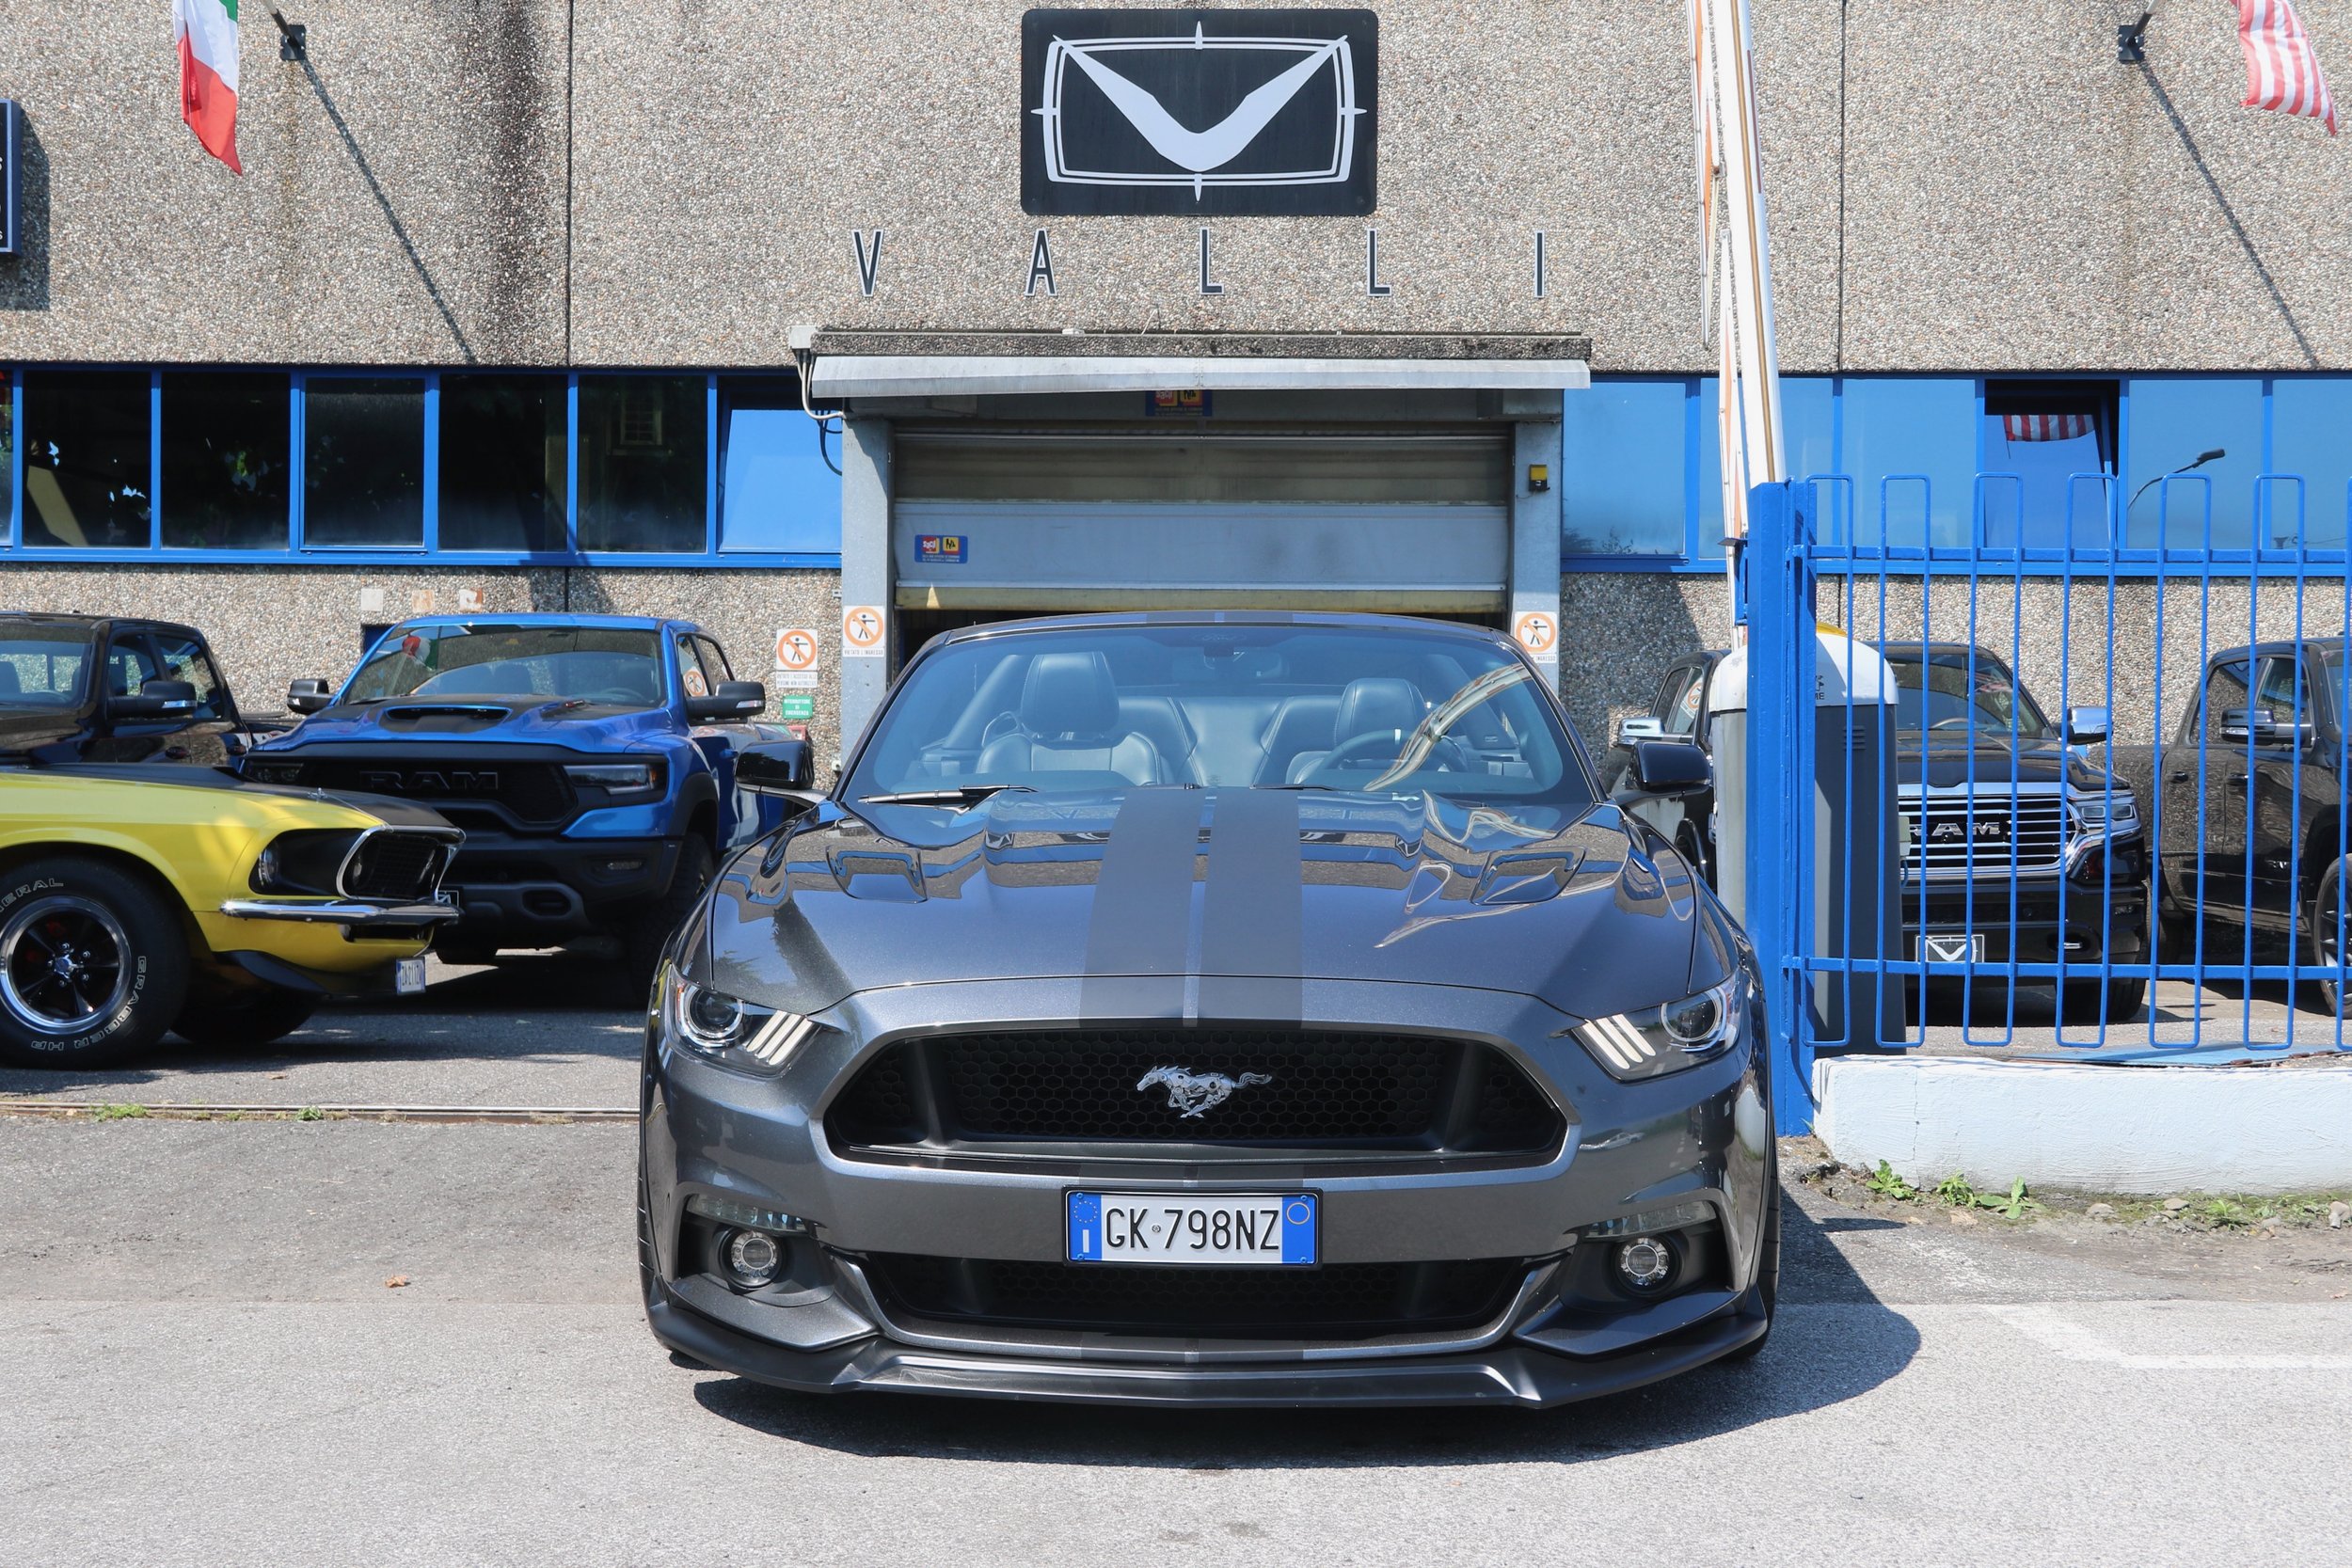 05 2015 Mustang GT 5.0L Coyote Convertible Marco Vignale.jpeg